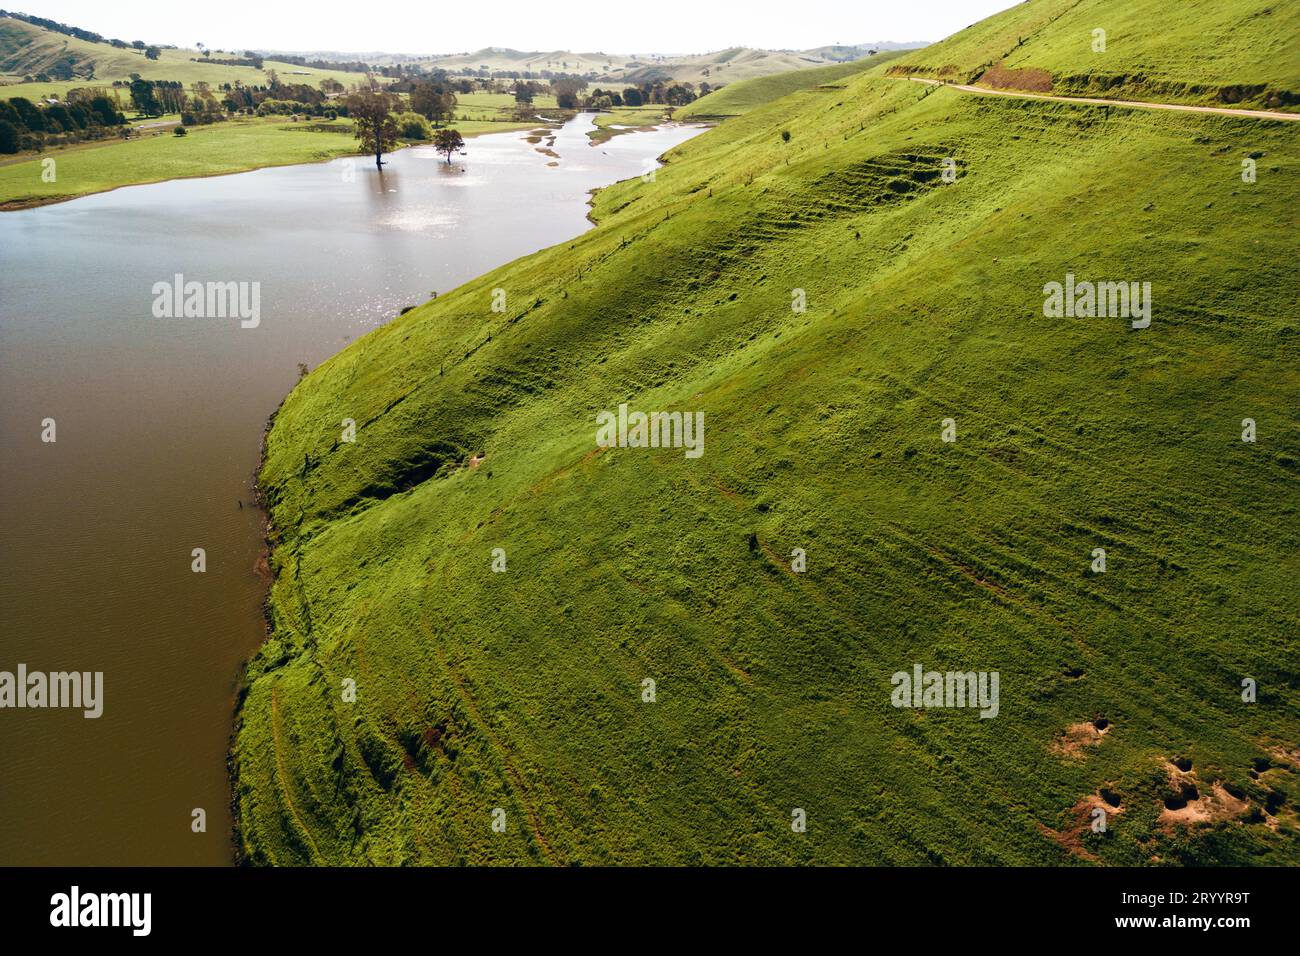 A view of grass covered hills on the edge of Lake Eildon. Stock Photo